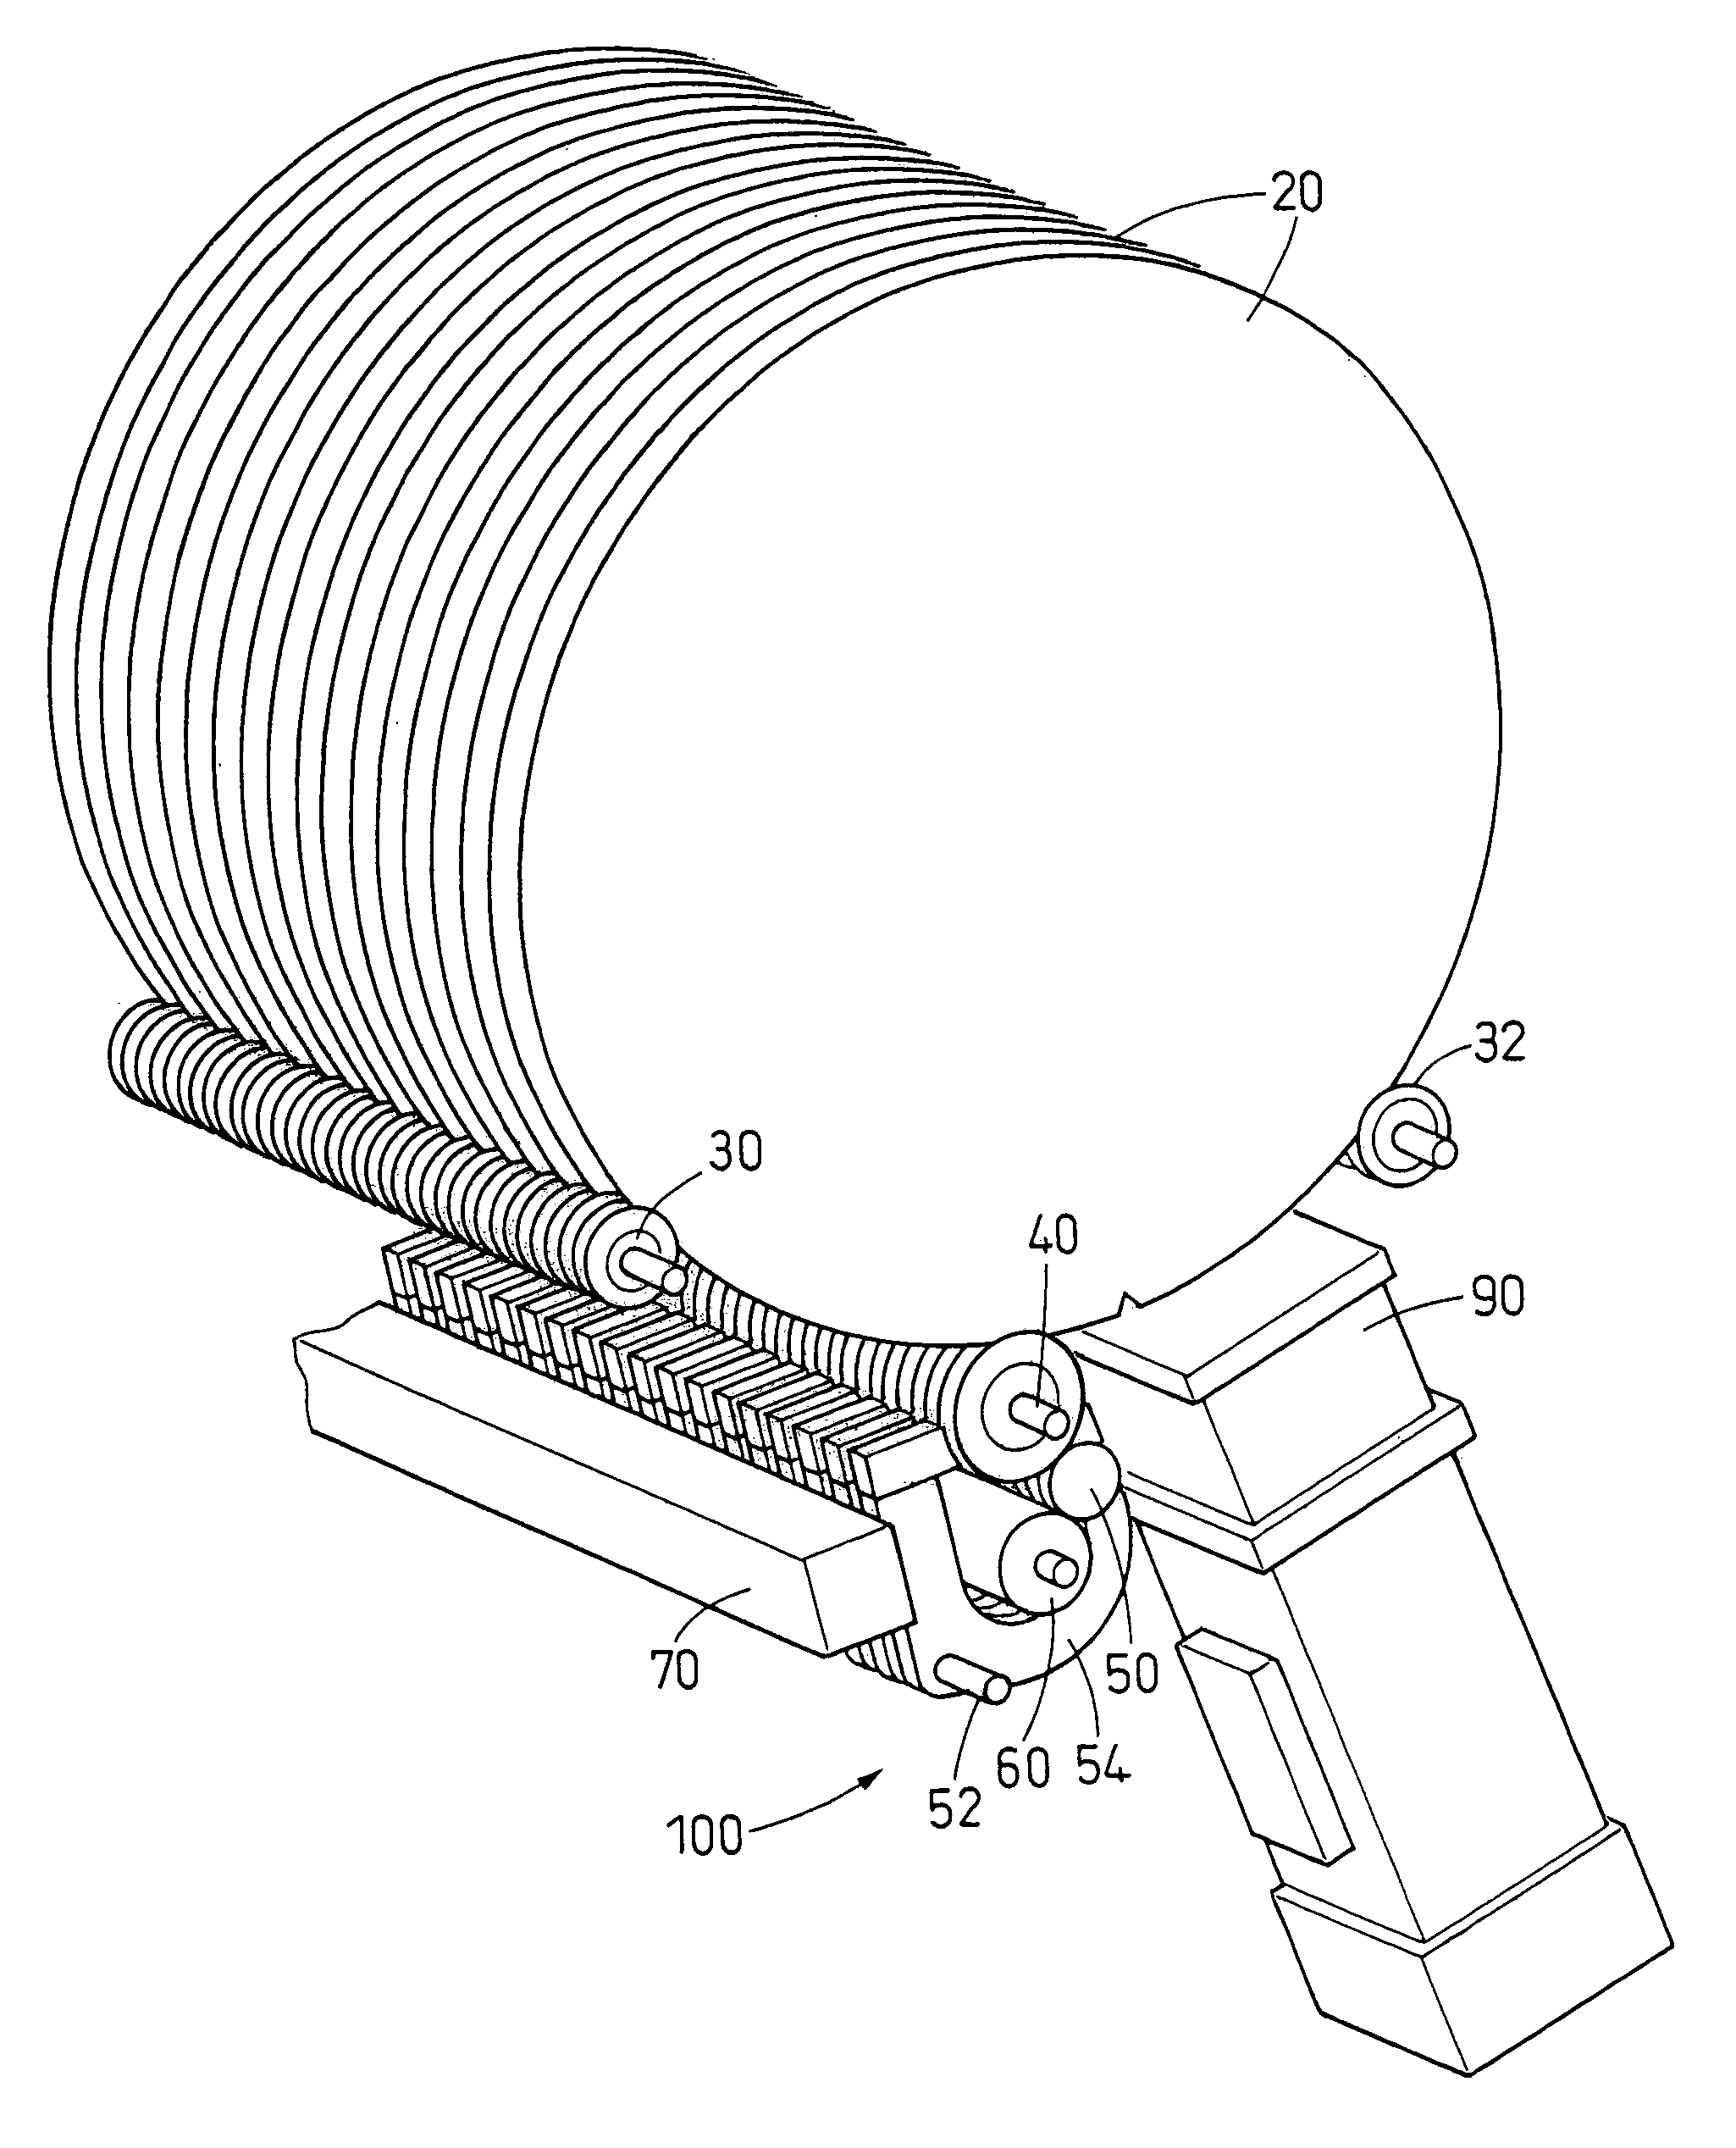 Device and method for the harmonized positioning of wafer disks